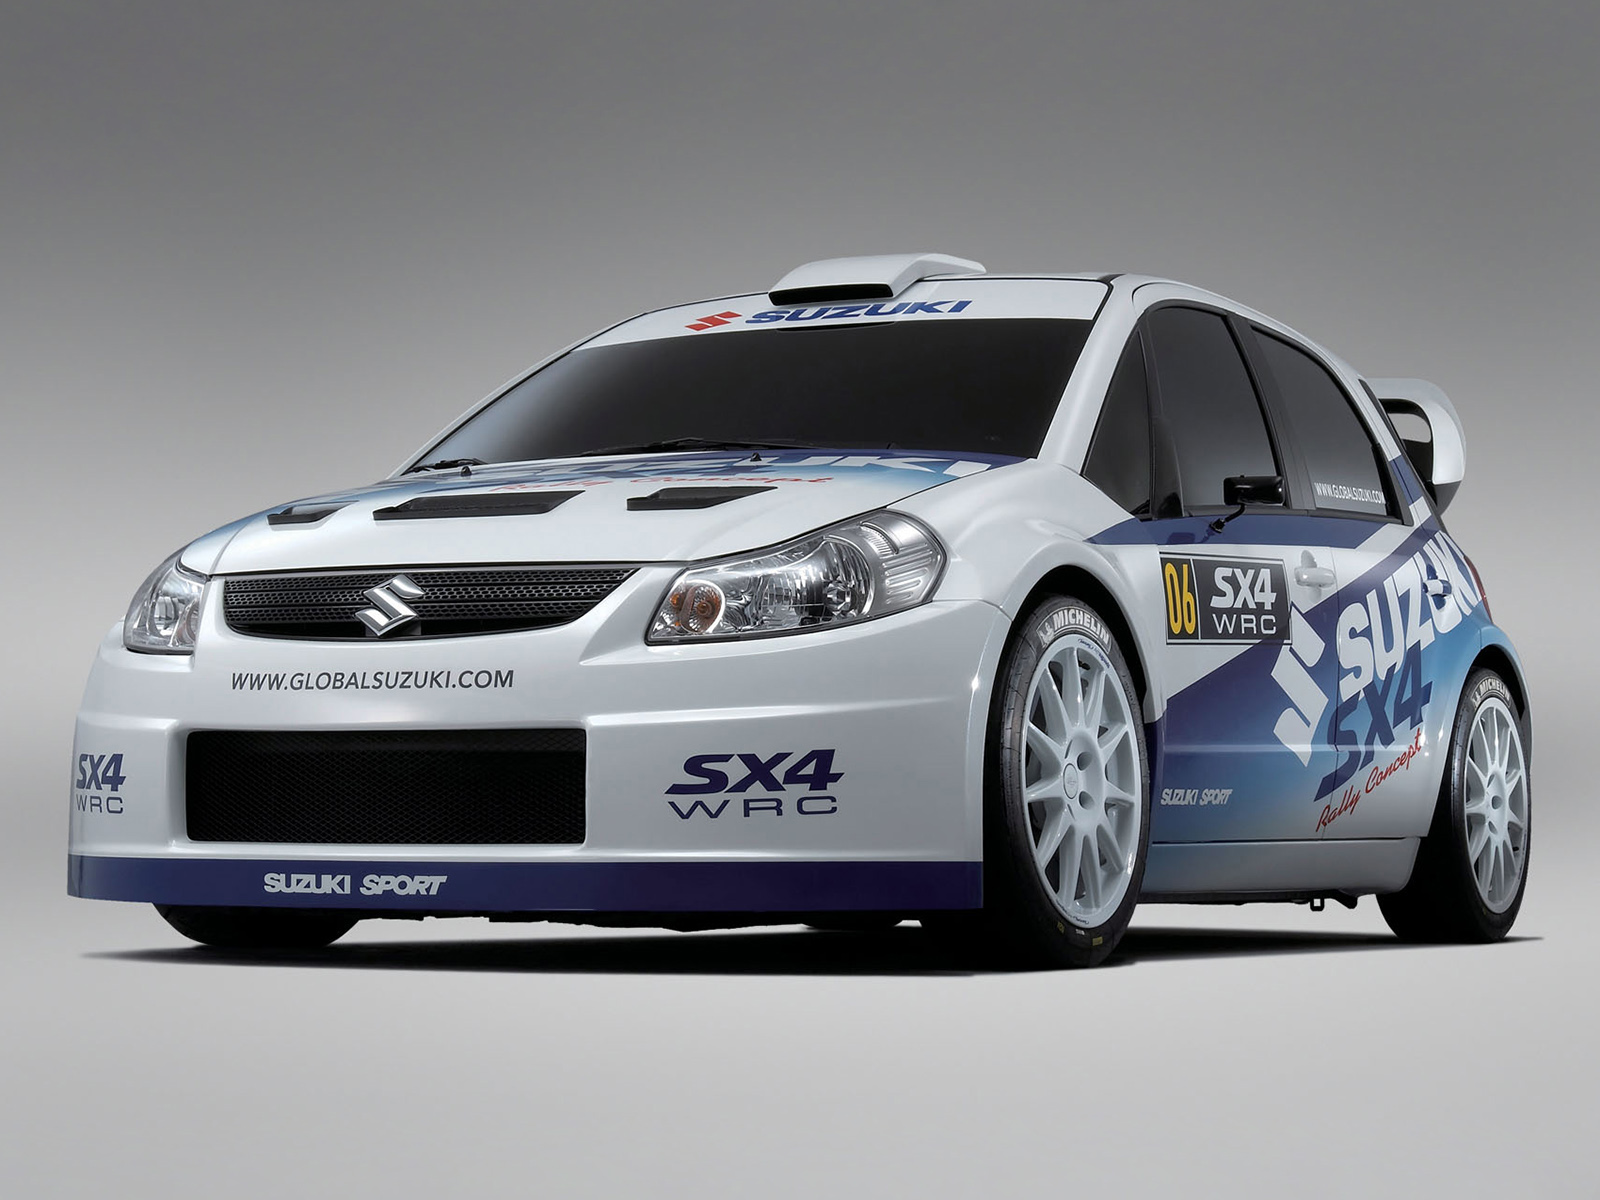 You can vote for this Suzuki SX4 WRC photo